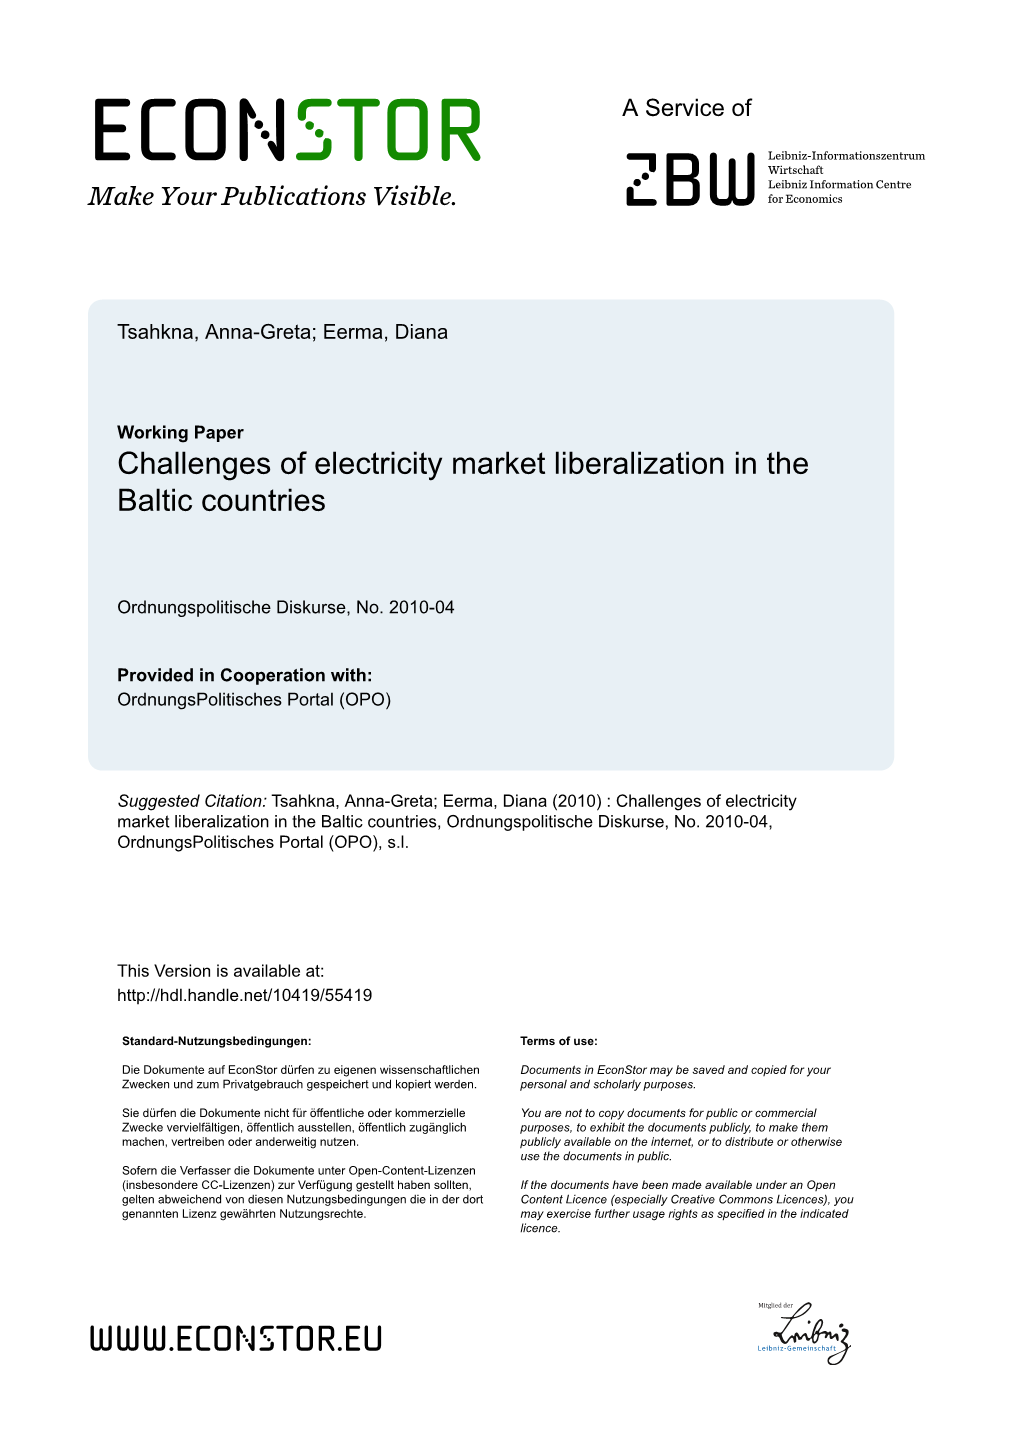 Challenges of Electricity Market Liberalization in the Baltic Countries